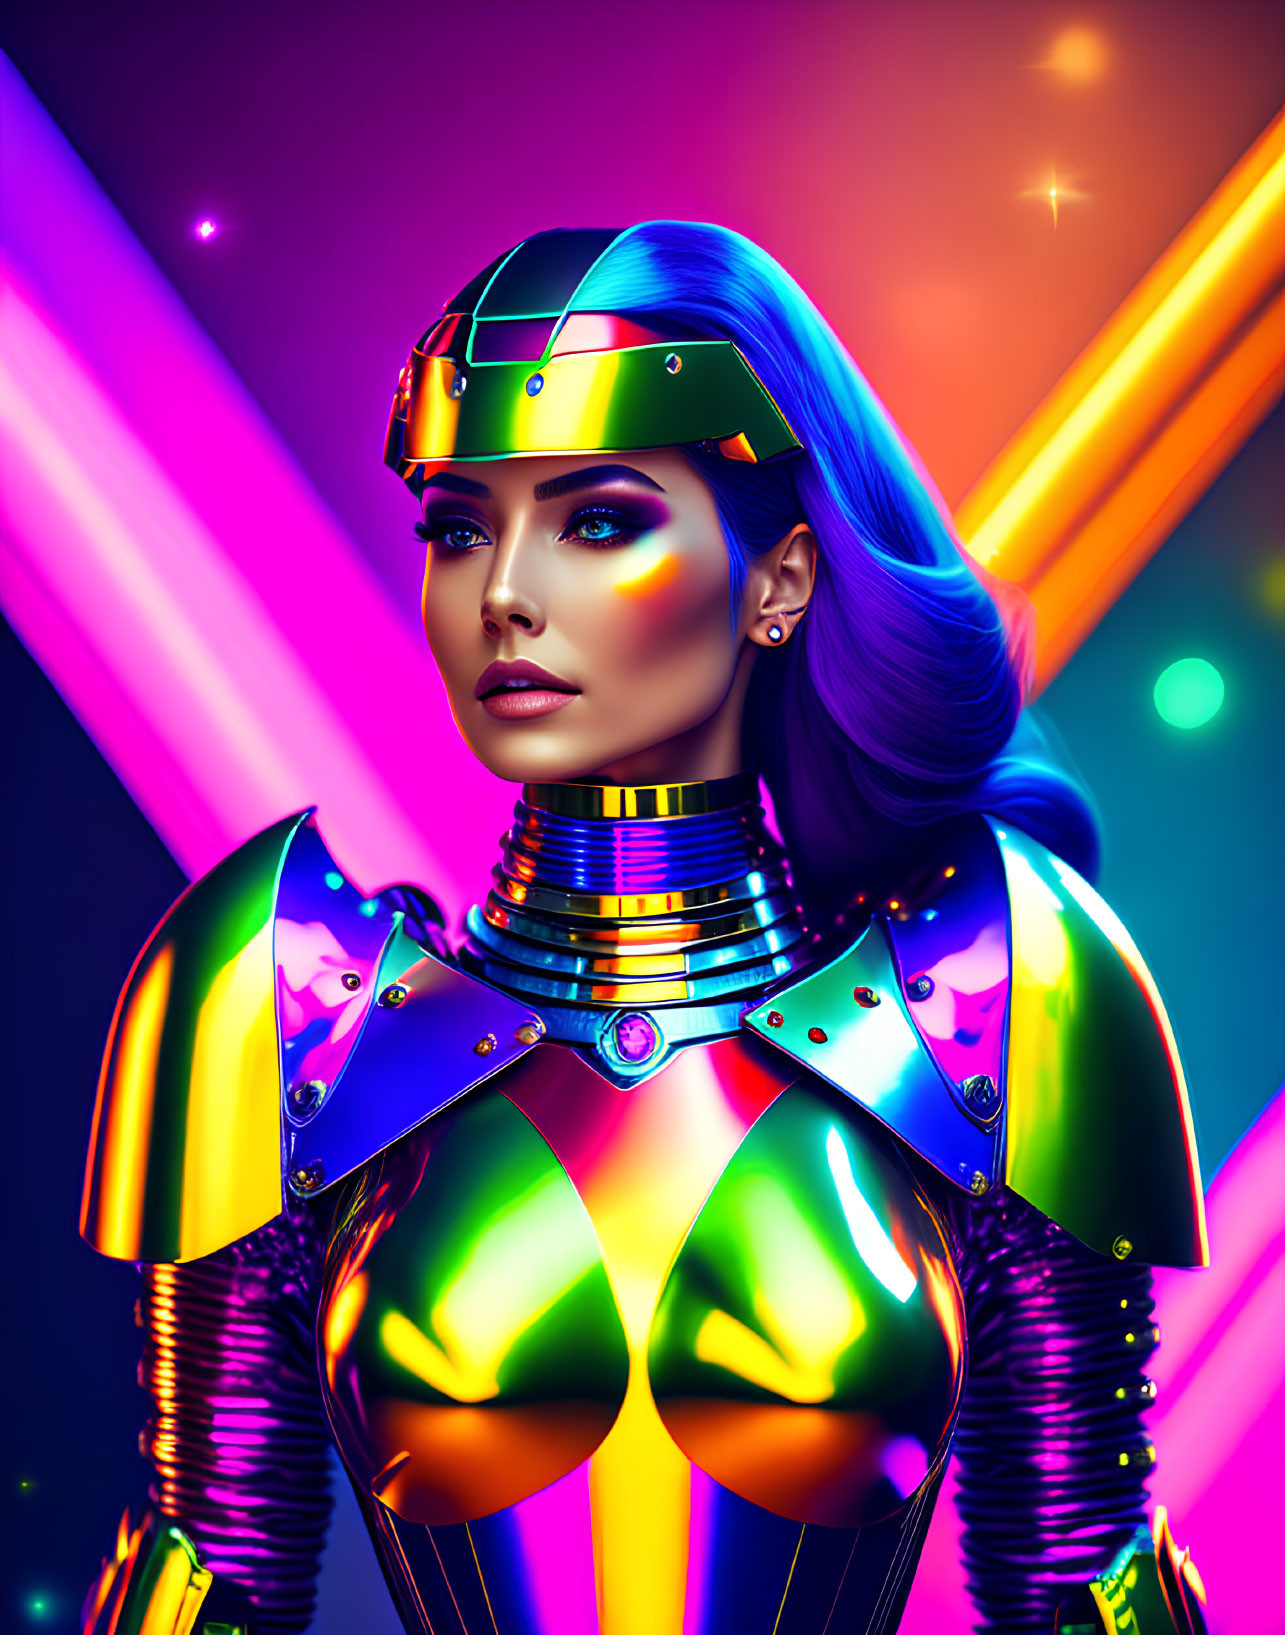 Colorful digital artwork: Woman with blue hair in futuristic armor on neon-lit background